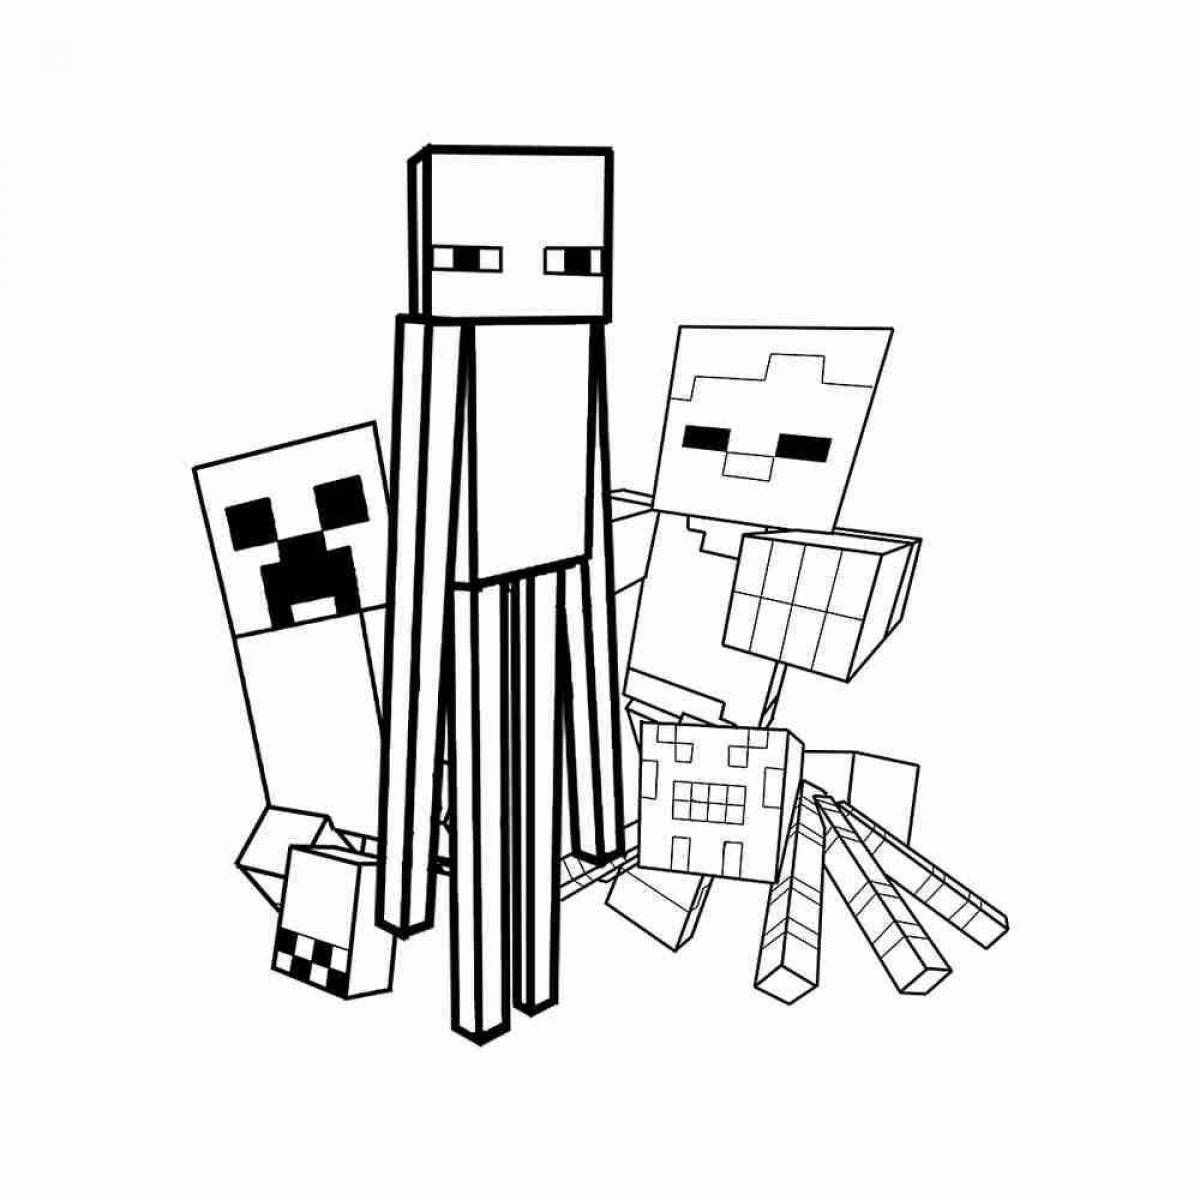 Fascinating enderman minecraft coloring page